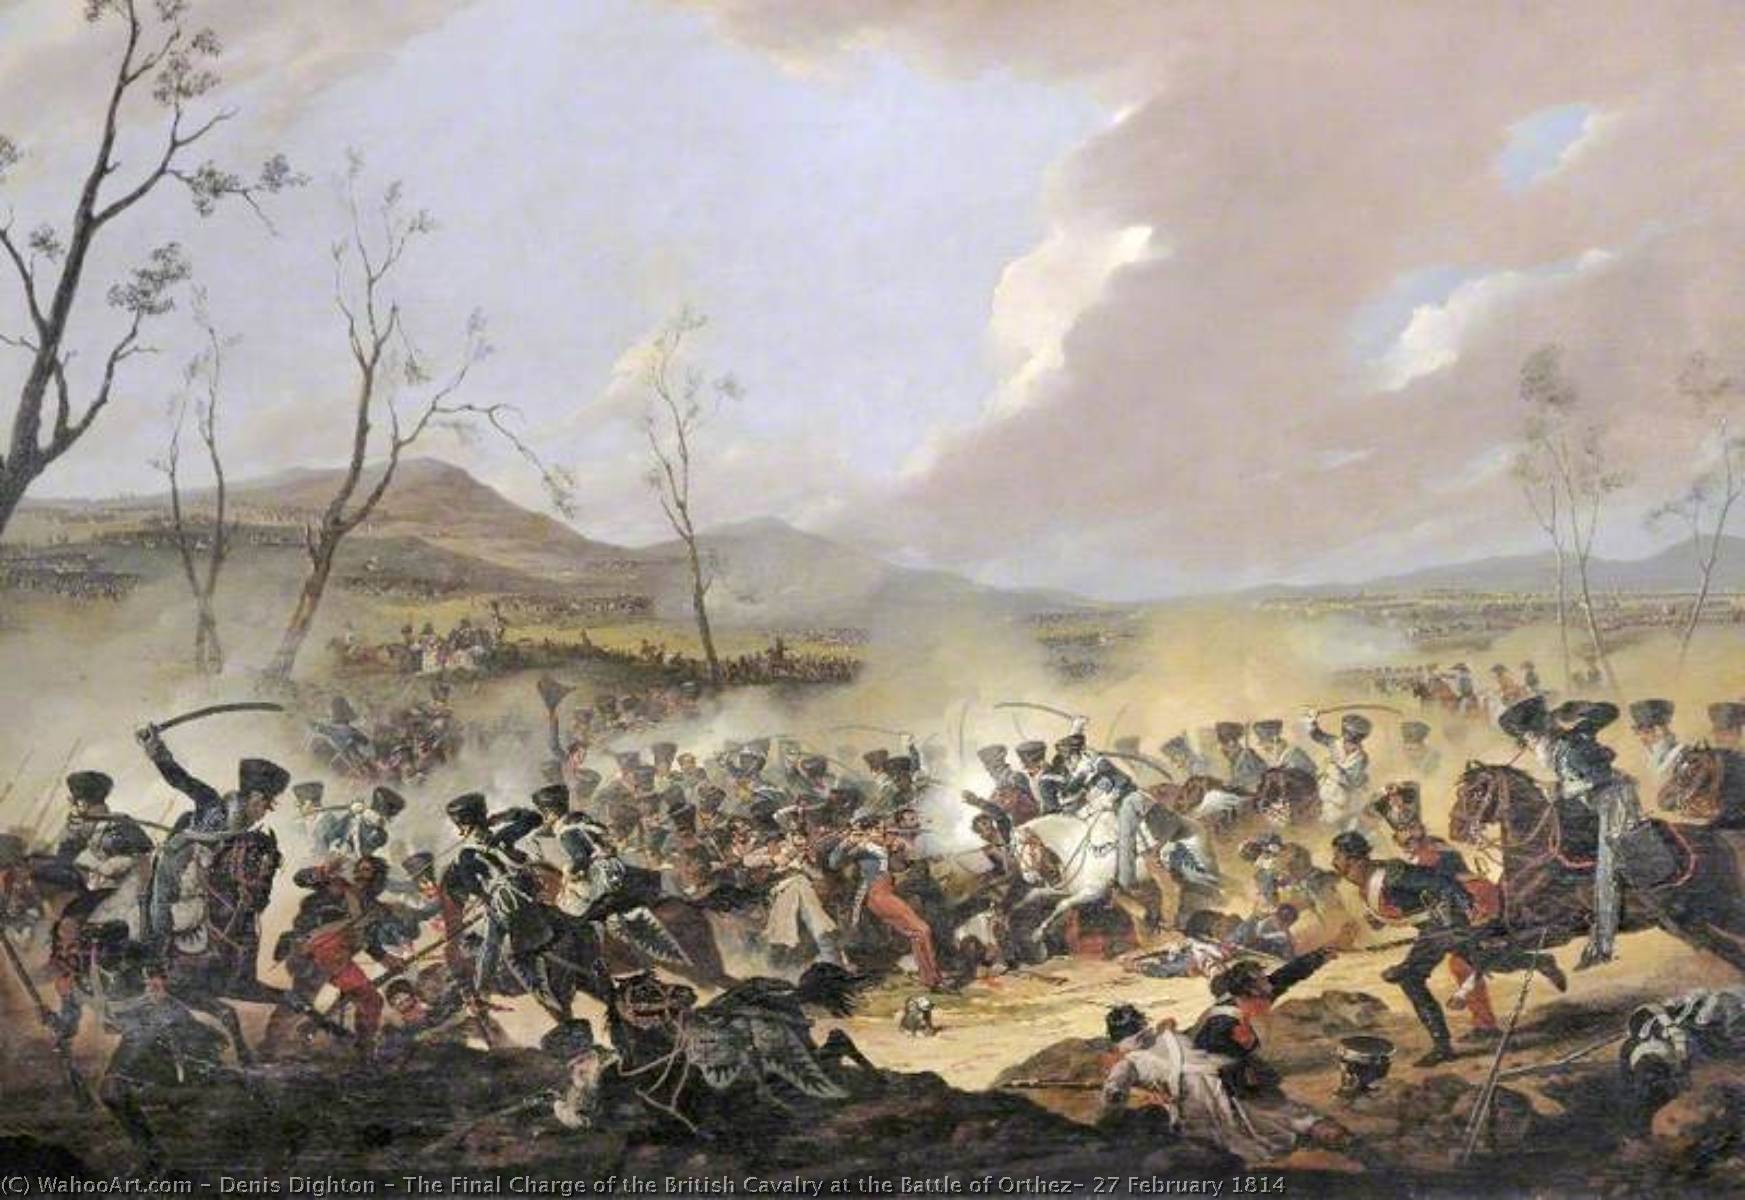 Wikioo.org - สารานุกรมวิจิตรศิลป์ - จิตรกรรม Denis Dighton - The Final Charge of the British Cavalry at the Battle of Orthez, 27 February 1814